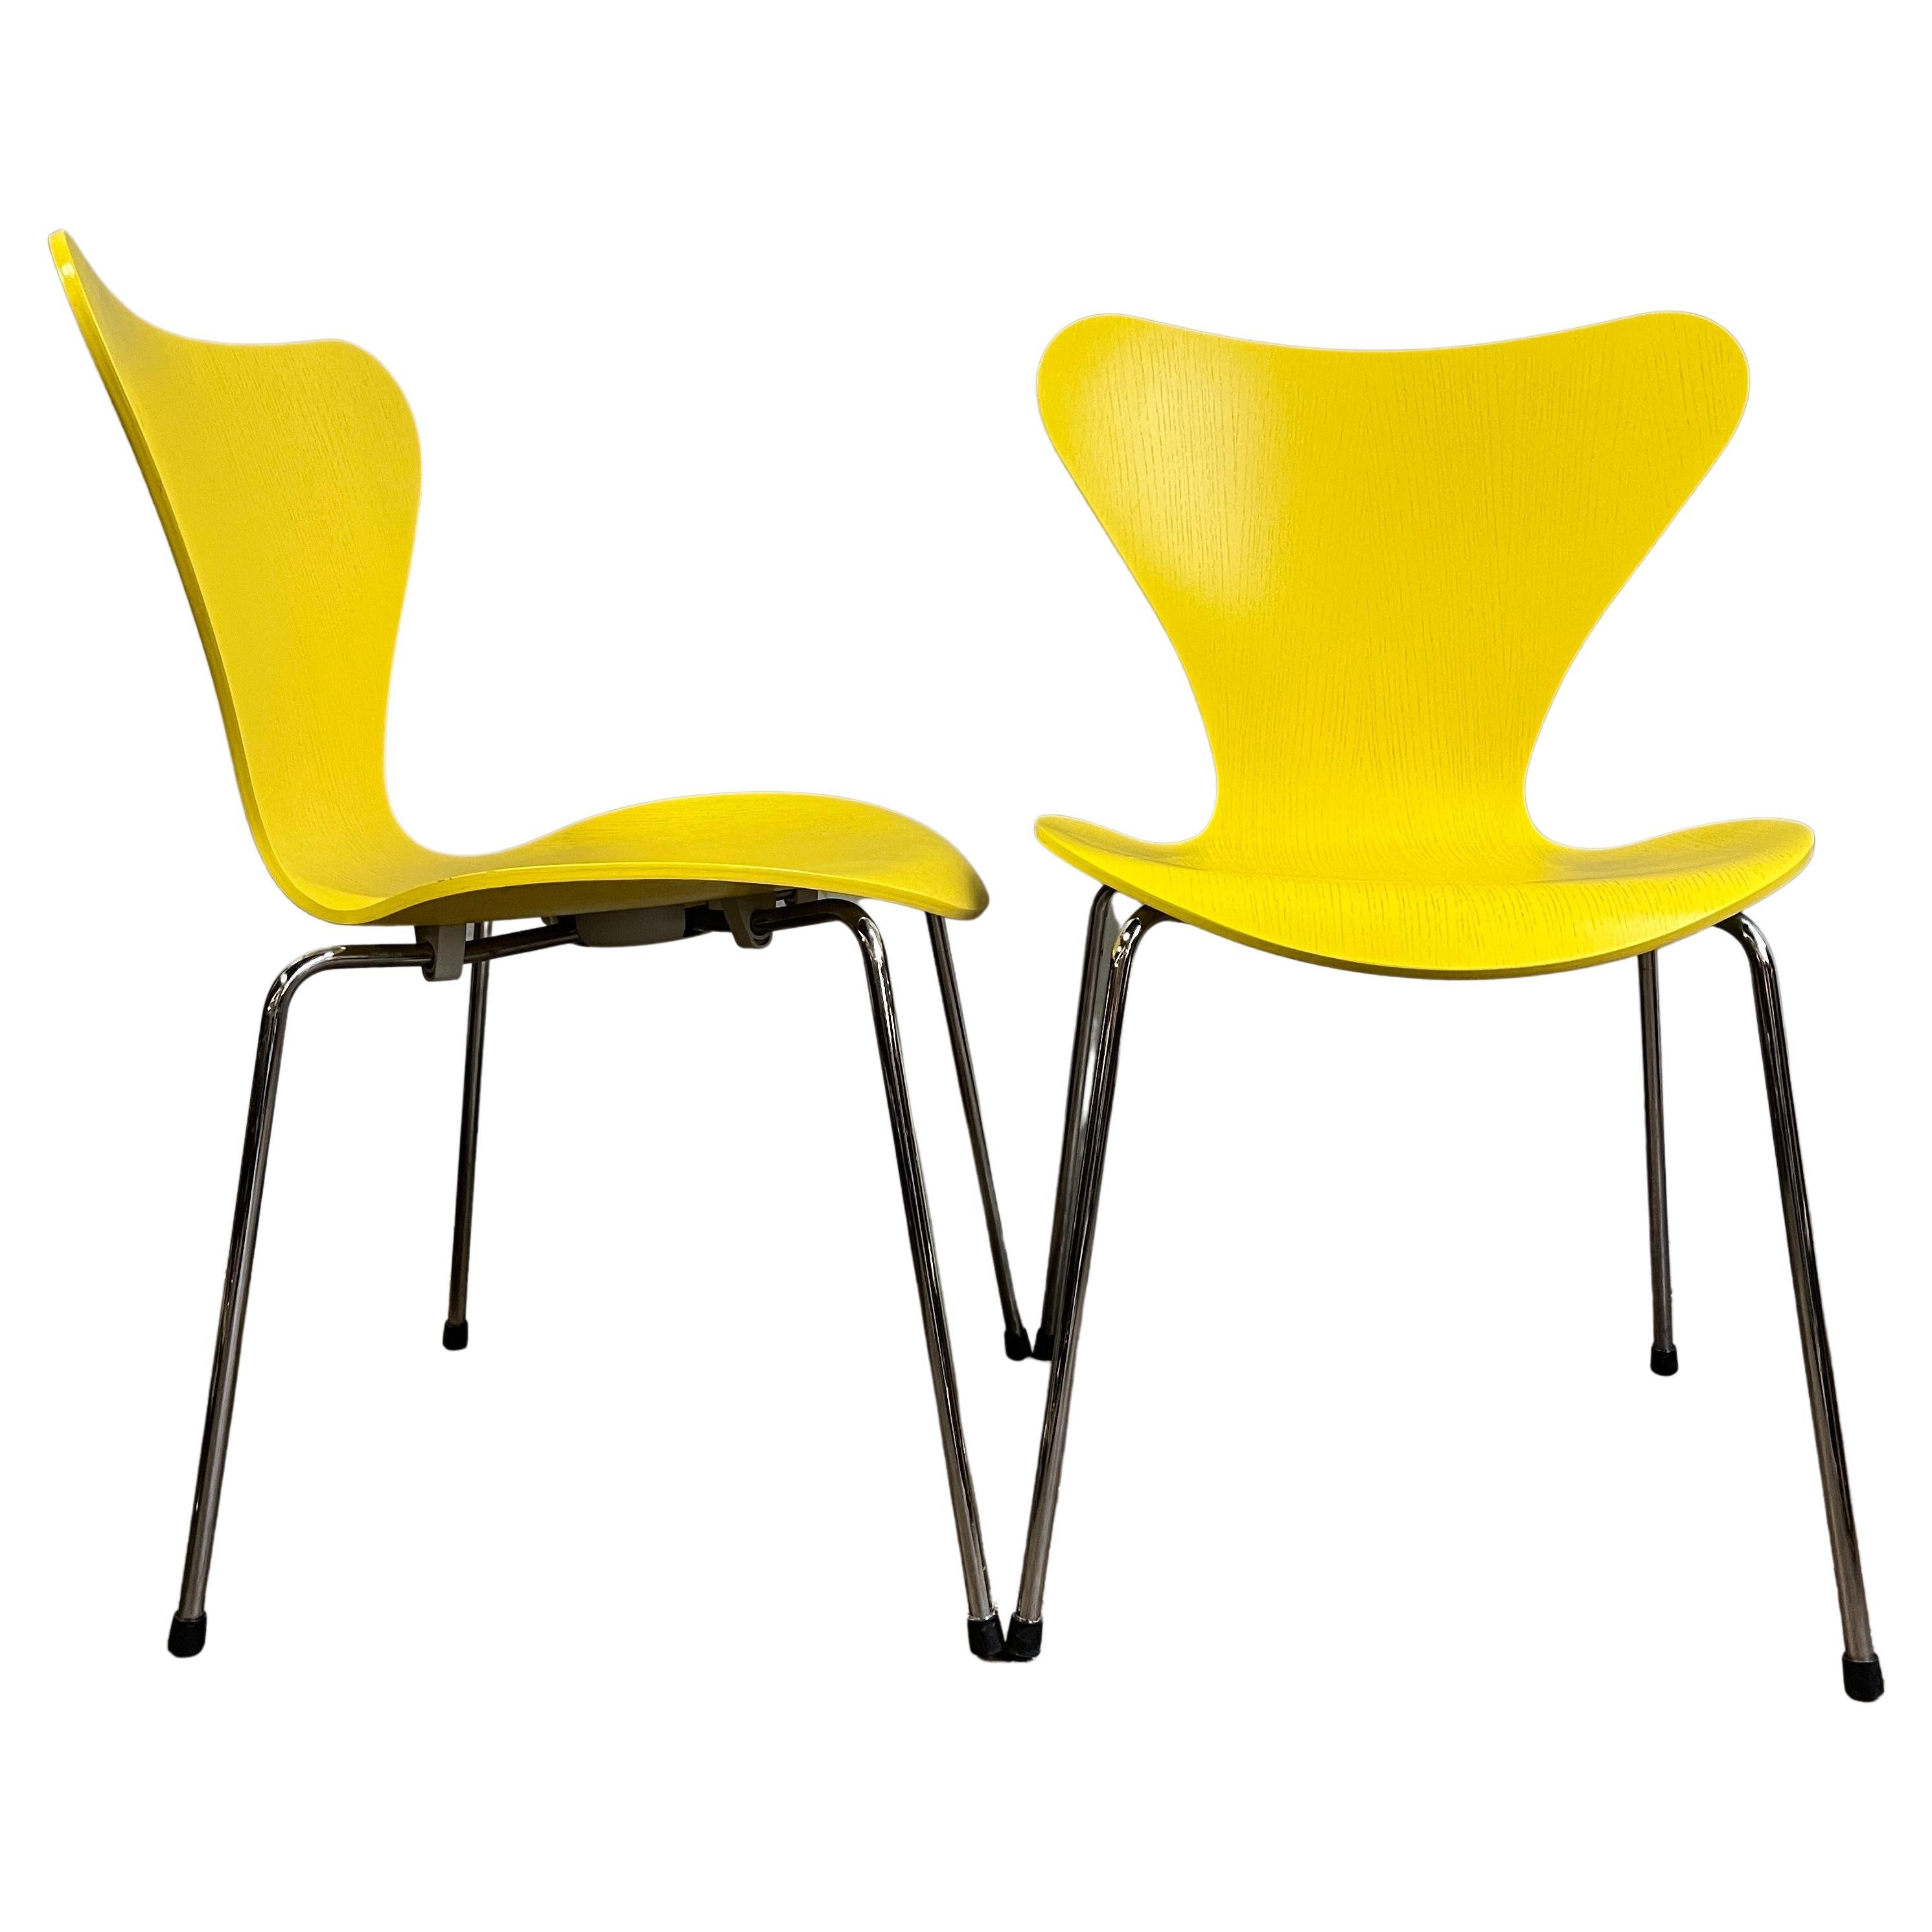 20th Century Midcentury Arne Jacobsen Series 7 Chairs Sunny Yellow For Sale